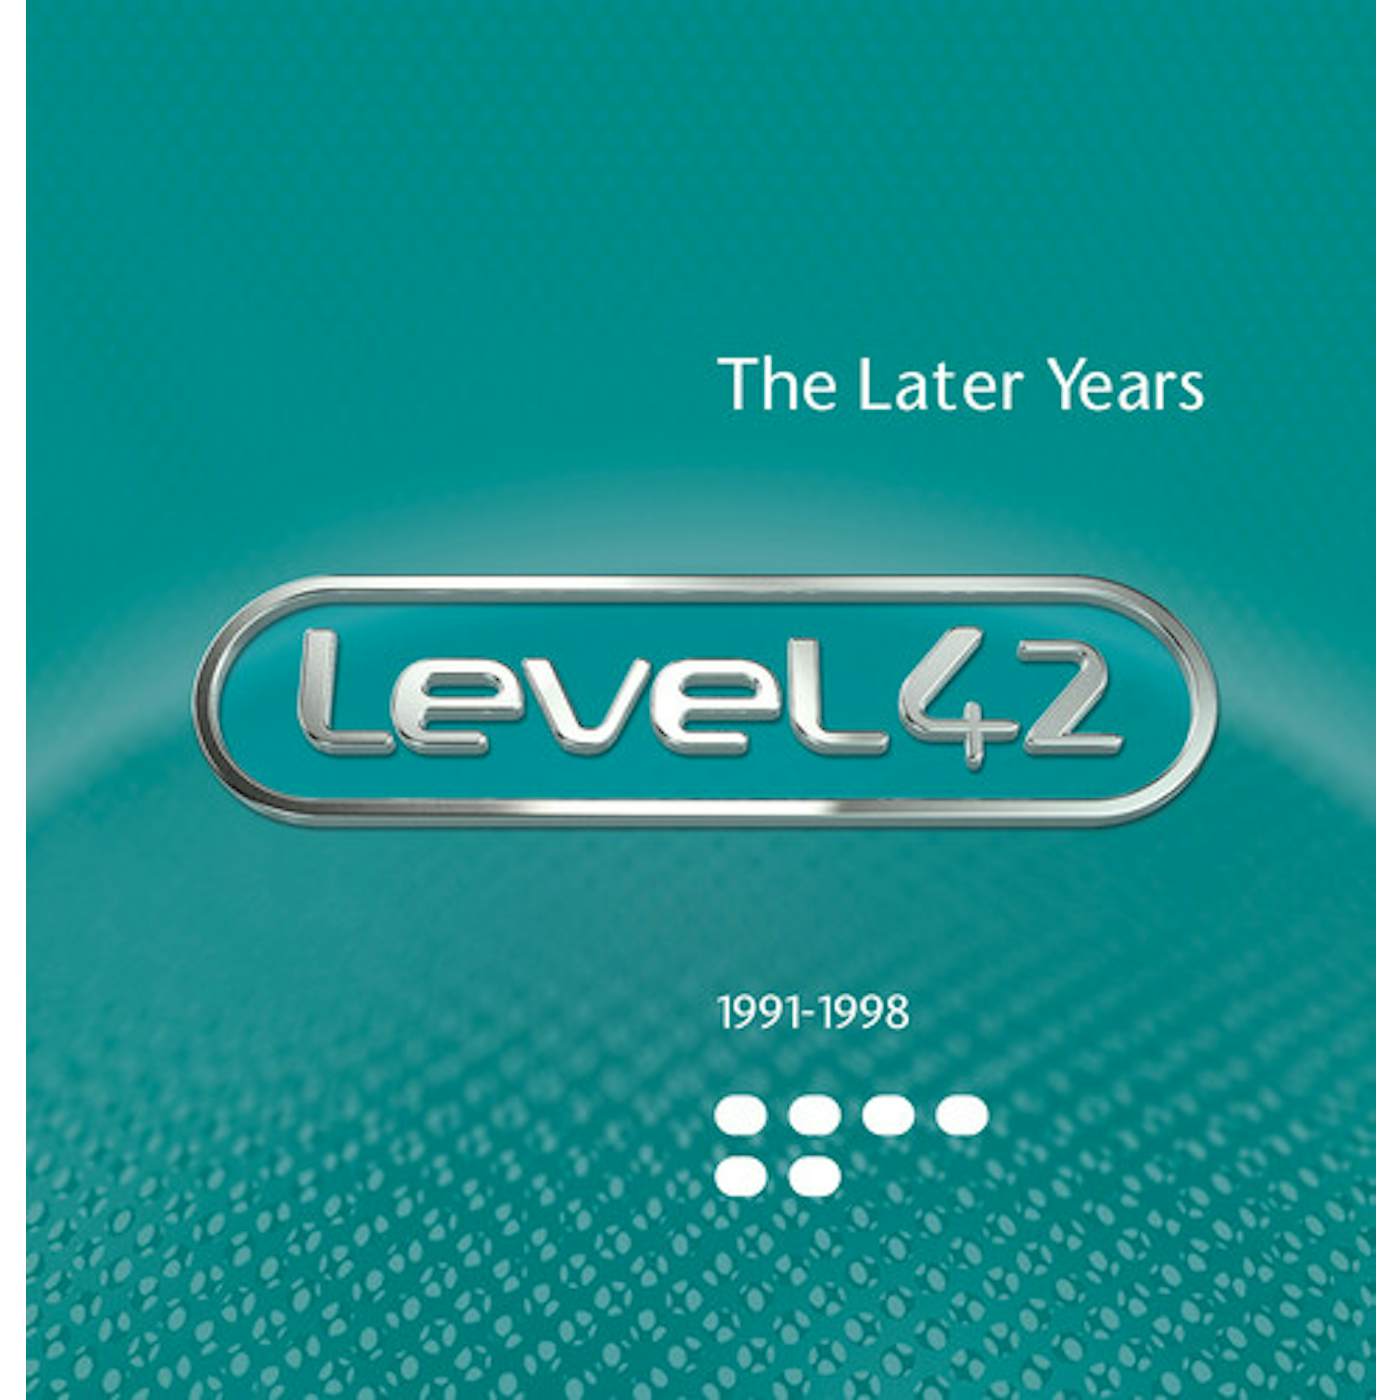 Level 42 LATER YEARS 1991-1998 CD